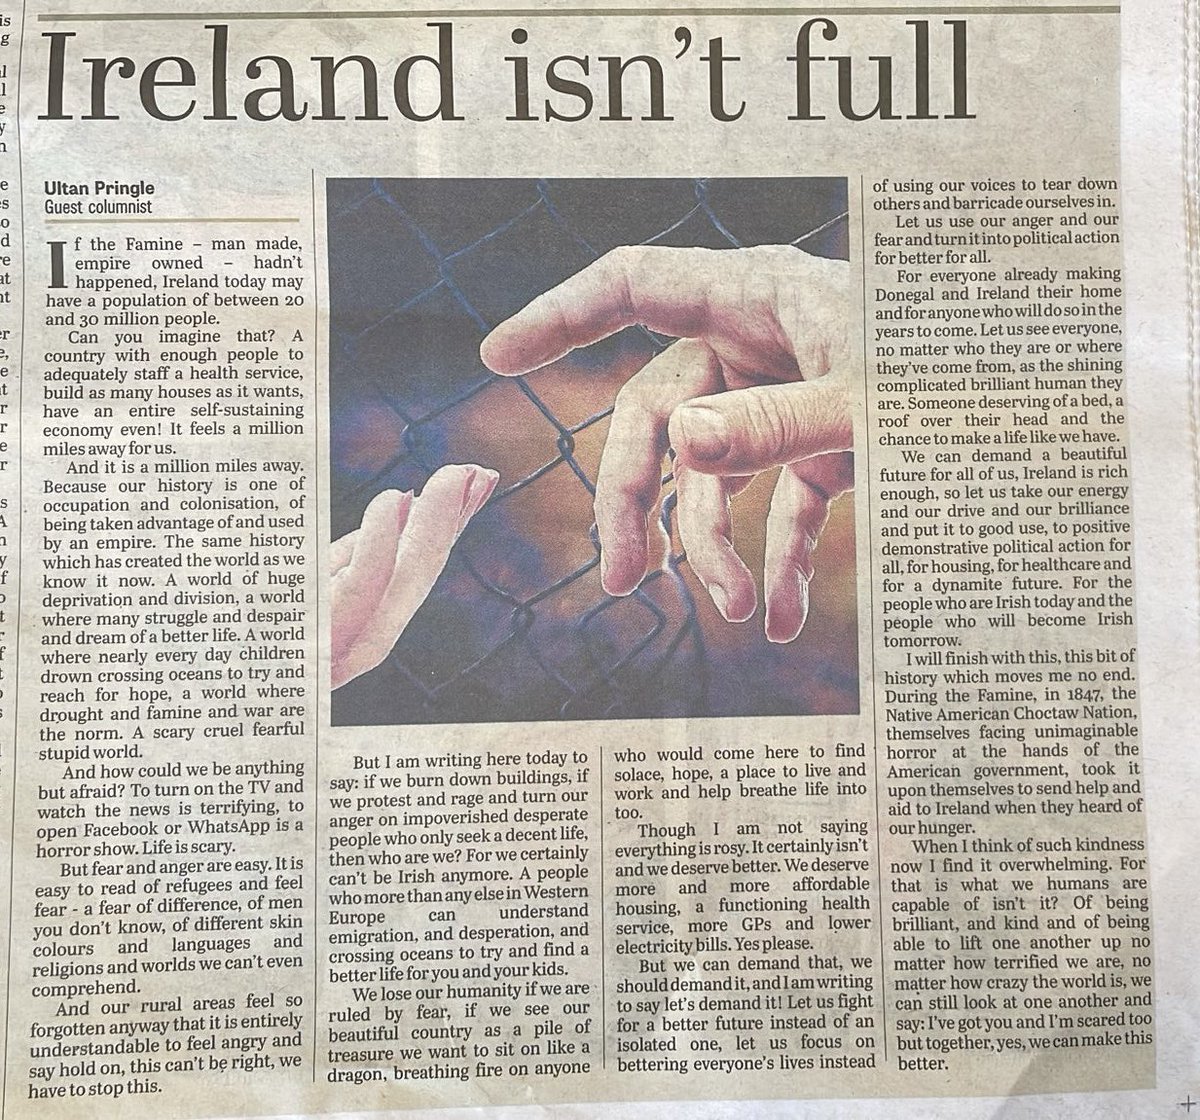 Wrote in today’s Donegal Democrat about how Ireland isn’t full, how the future can only be found in our collective humanity and in all of us fighting for better for everyone. Everything is shit and scary but when fear wins what’s left of us? #RefugeesWelcome